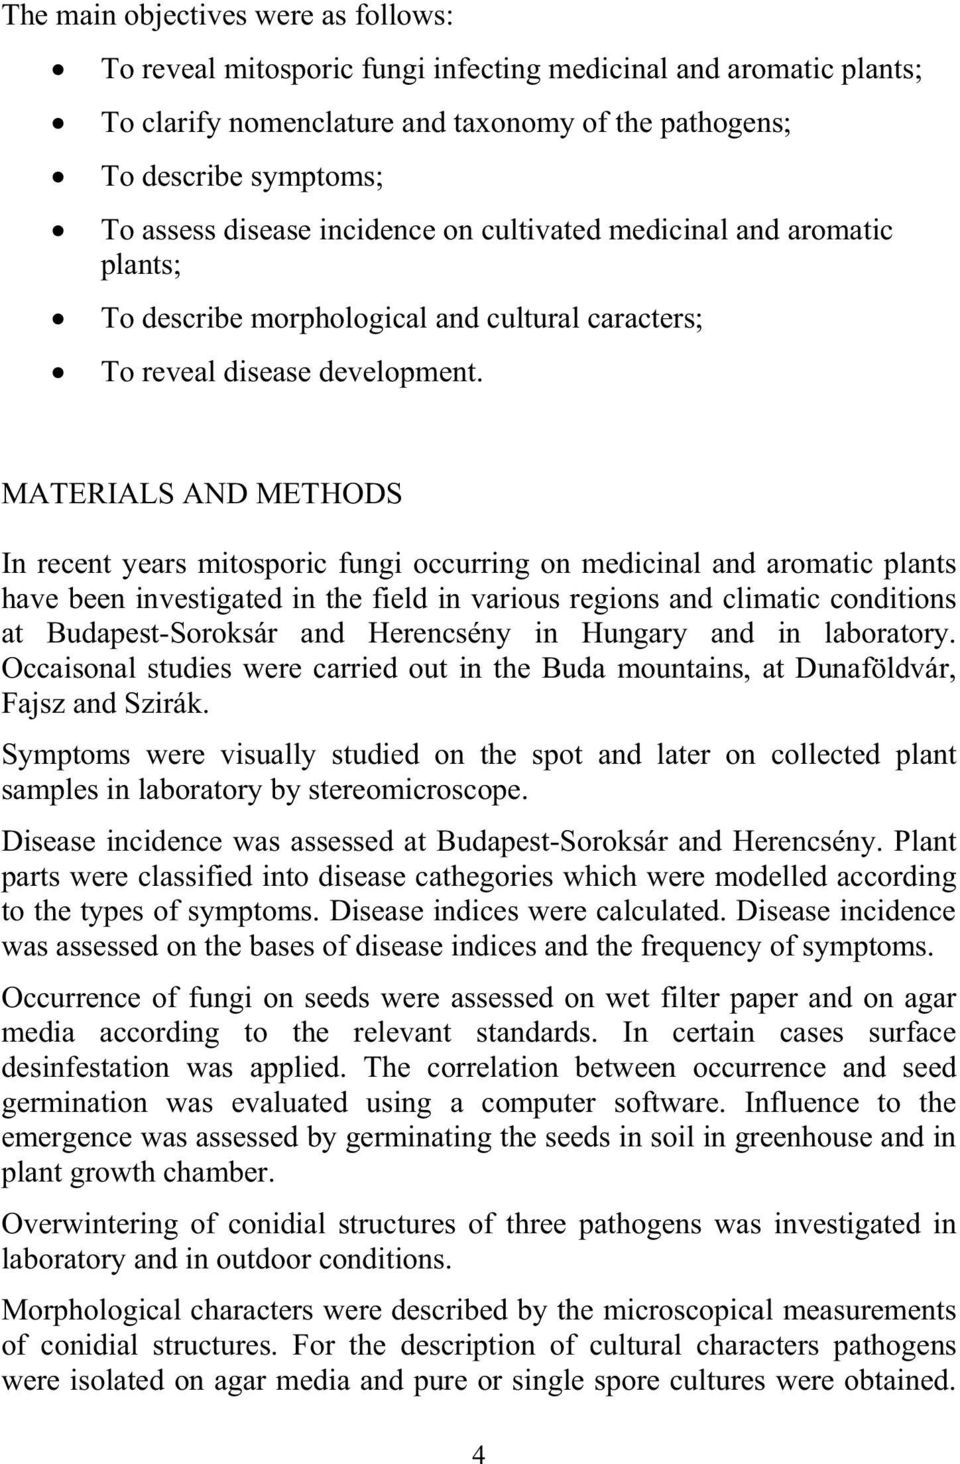 MATERIALS AND METHODS In recent years mitosporic fungi occurring on medicinal and aromatic plants have been investigated in the field in various regions and climatic conditions at Budapest-Soroksár